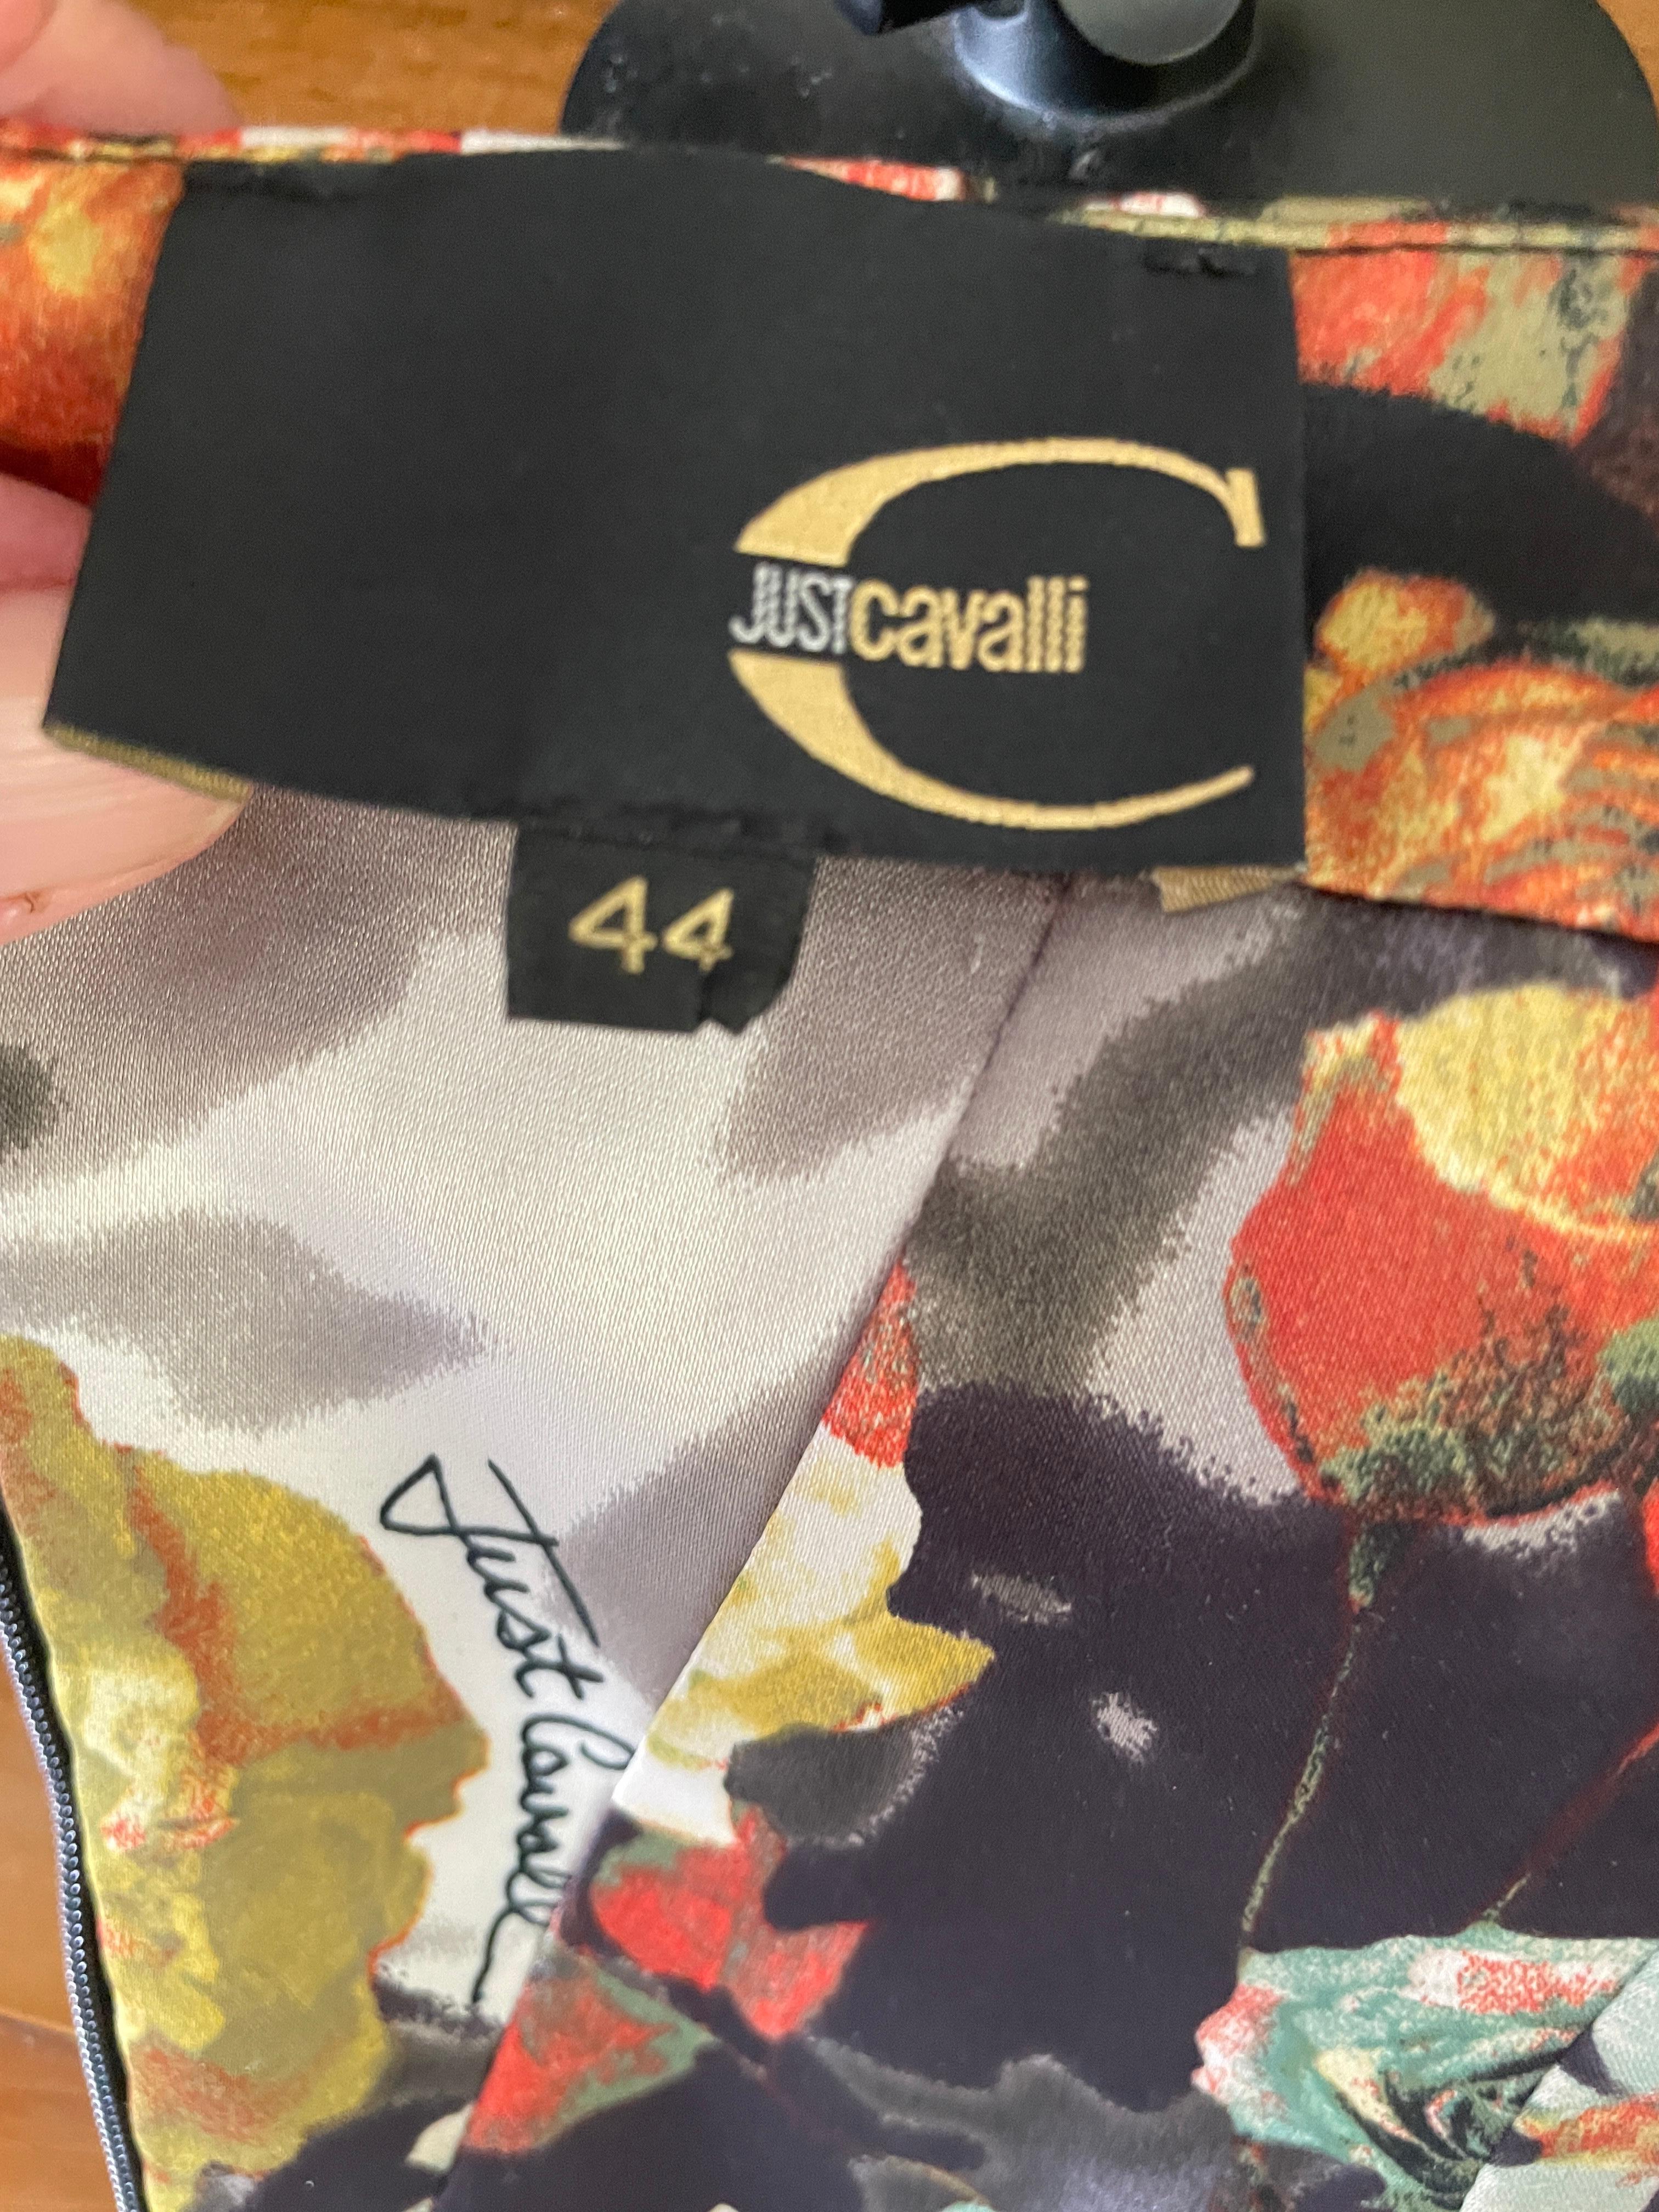 Just Cavalli Vintage Floral Pattern Cocktail Dress by Roberto Cavalli  For Sale 2